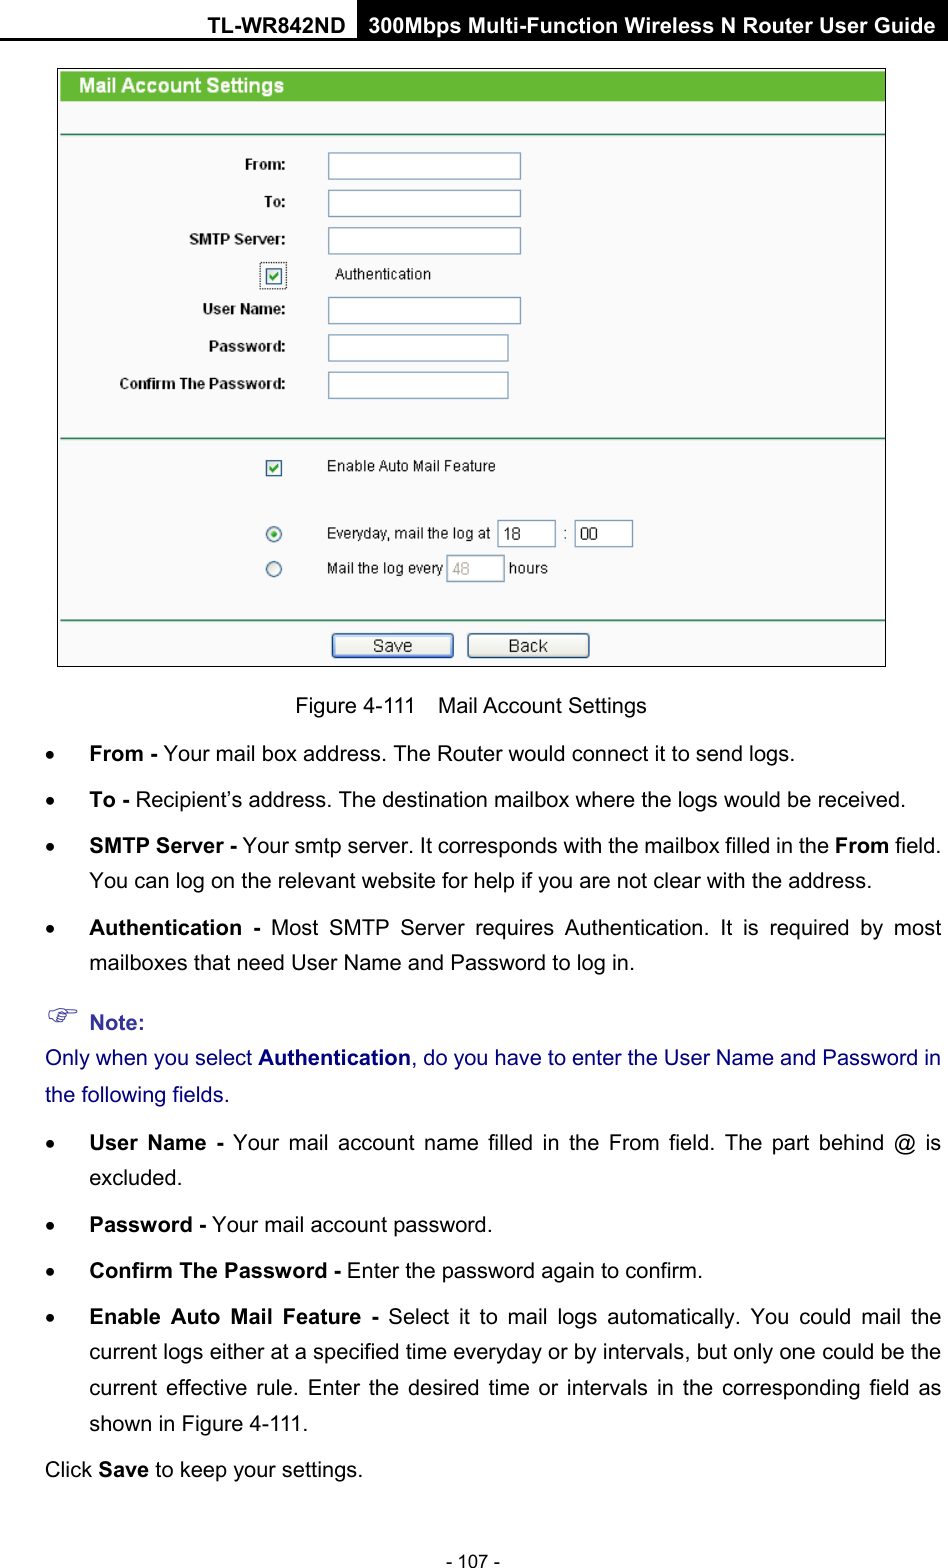 TL-WR842ND 300Mbps Multi-Function Wireless N Router User Guide  - 107 -  Figure 4-111  Mail Account Settings • From - Your mail box address. The Router would connect it to send logs. • To - Recipient’s address. The destination mailbox where the logs would be received. • SMTP Server - Your smtp server. It corresponds with the mailbox filled in the From field. You can log on the relevant website for help if you are not clear with the address. • Authentication - Most SMTP Server requires Authentication. It is required by most mailboxes that need User Name and Password to log in.  Note: Only when you select Authentication, do you have to enter the User Name and Password in the following fields.   • User Name  - Your mail account name filled in the From field. The part behind @ is excluded. • Password - Your mail account password. • Confirm The Password - Enter the password again to confirm. • Enable Auto Mail Feature - Select it to mail logs automatically. You  could mail the current logs either at a specified time everyday or by intervals, but only one could be the current effective rule. Enter the desired time or intervals in the corresponding field as shown in Figure 4-111. Click Save to keep your settings. 